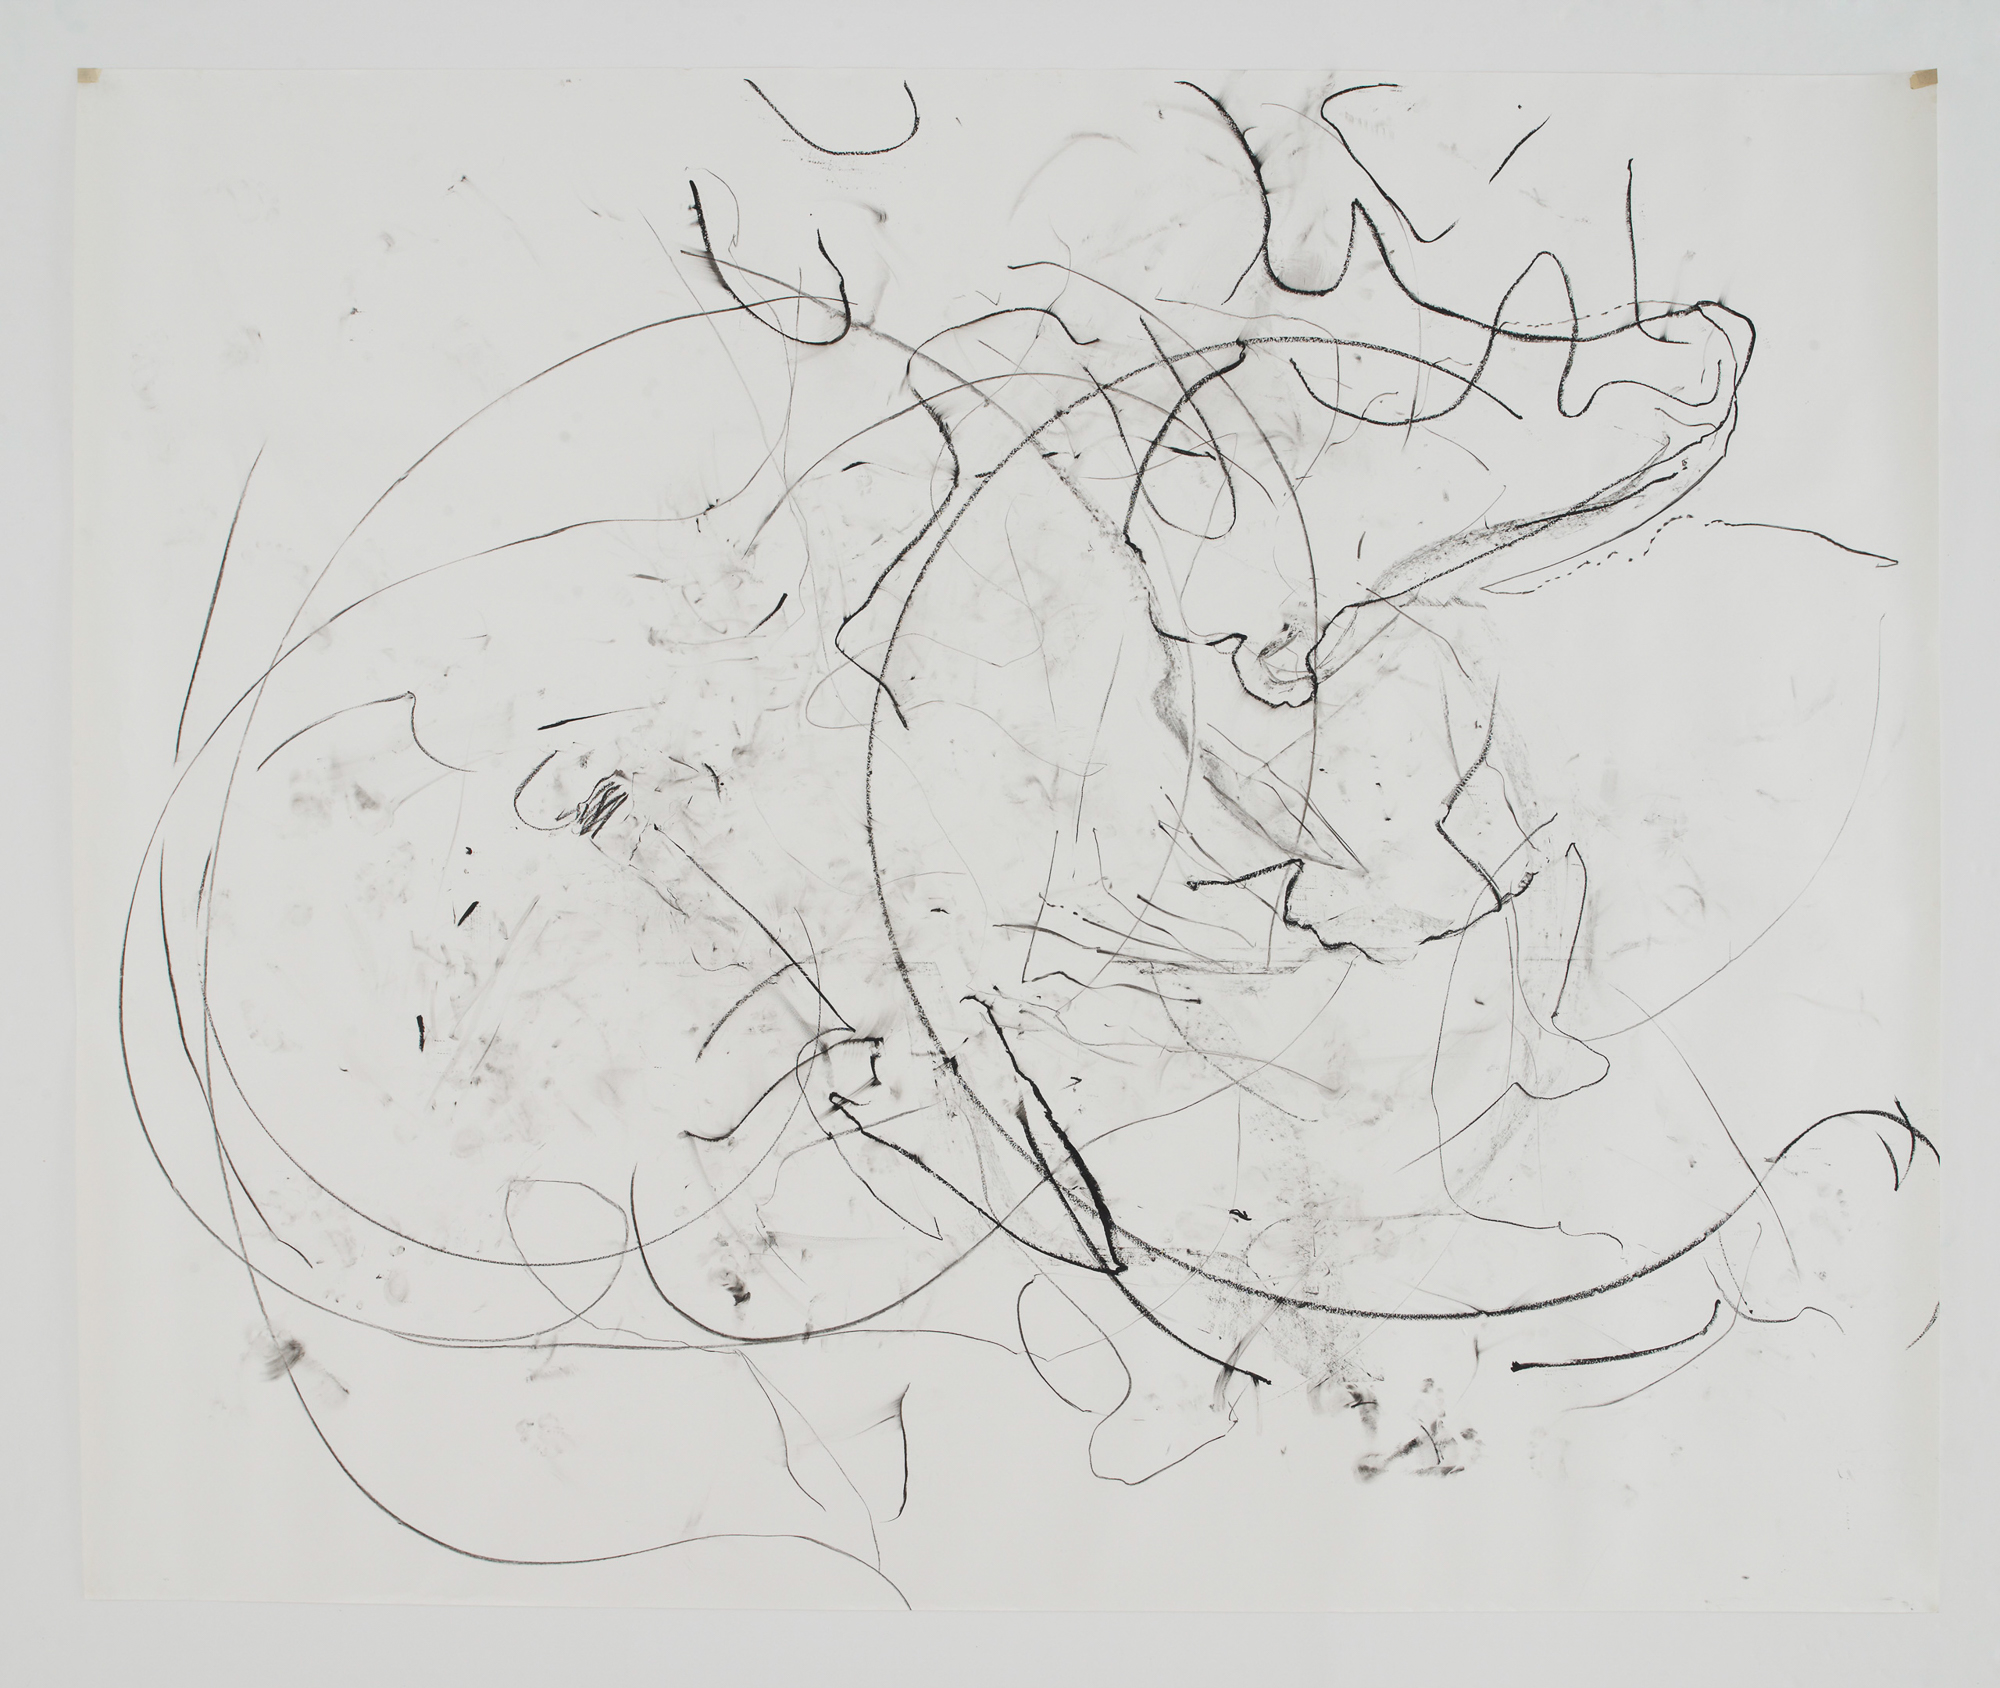 Untitled (Montpellier) from It’s a Draw, 2002 Charcoal on paper 130 x 106.75 inches (330.2 x 271.1 cm)